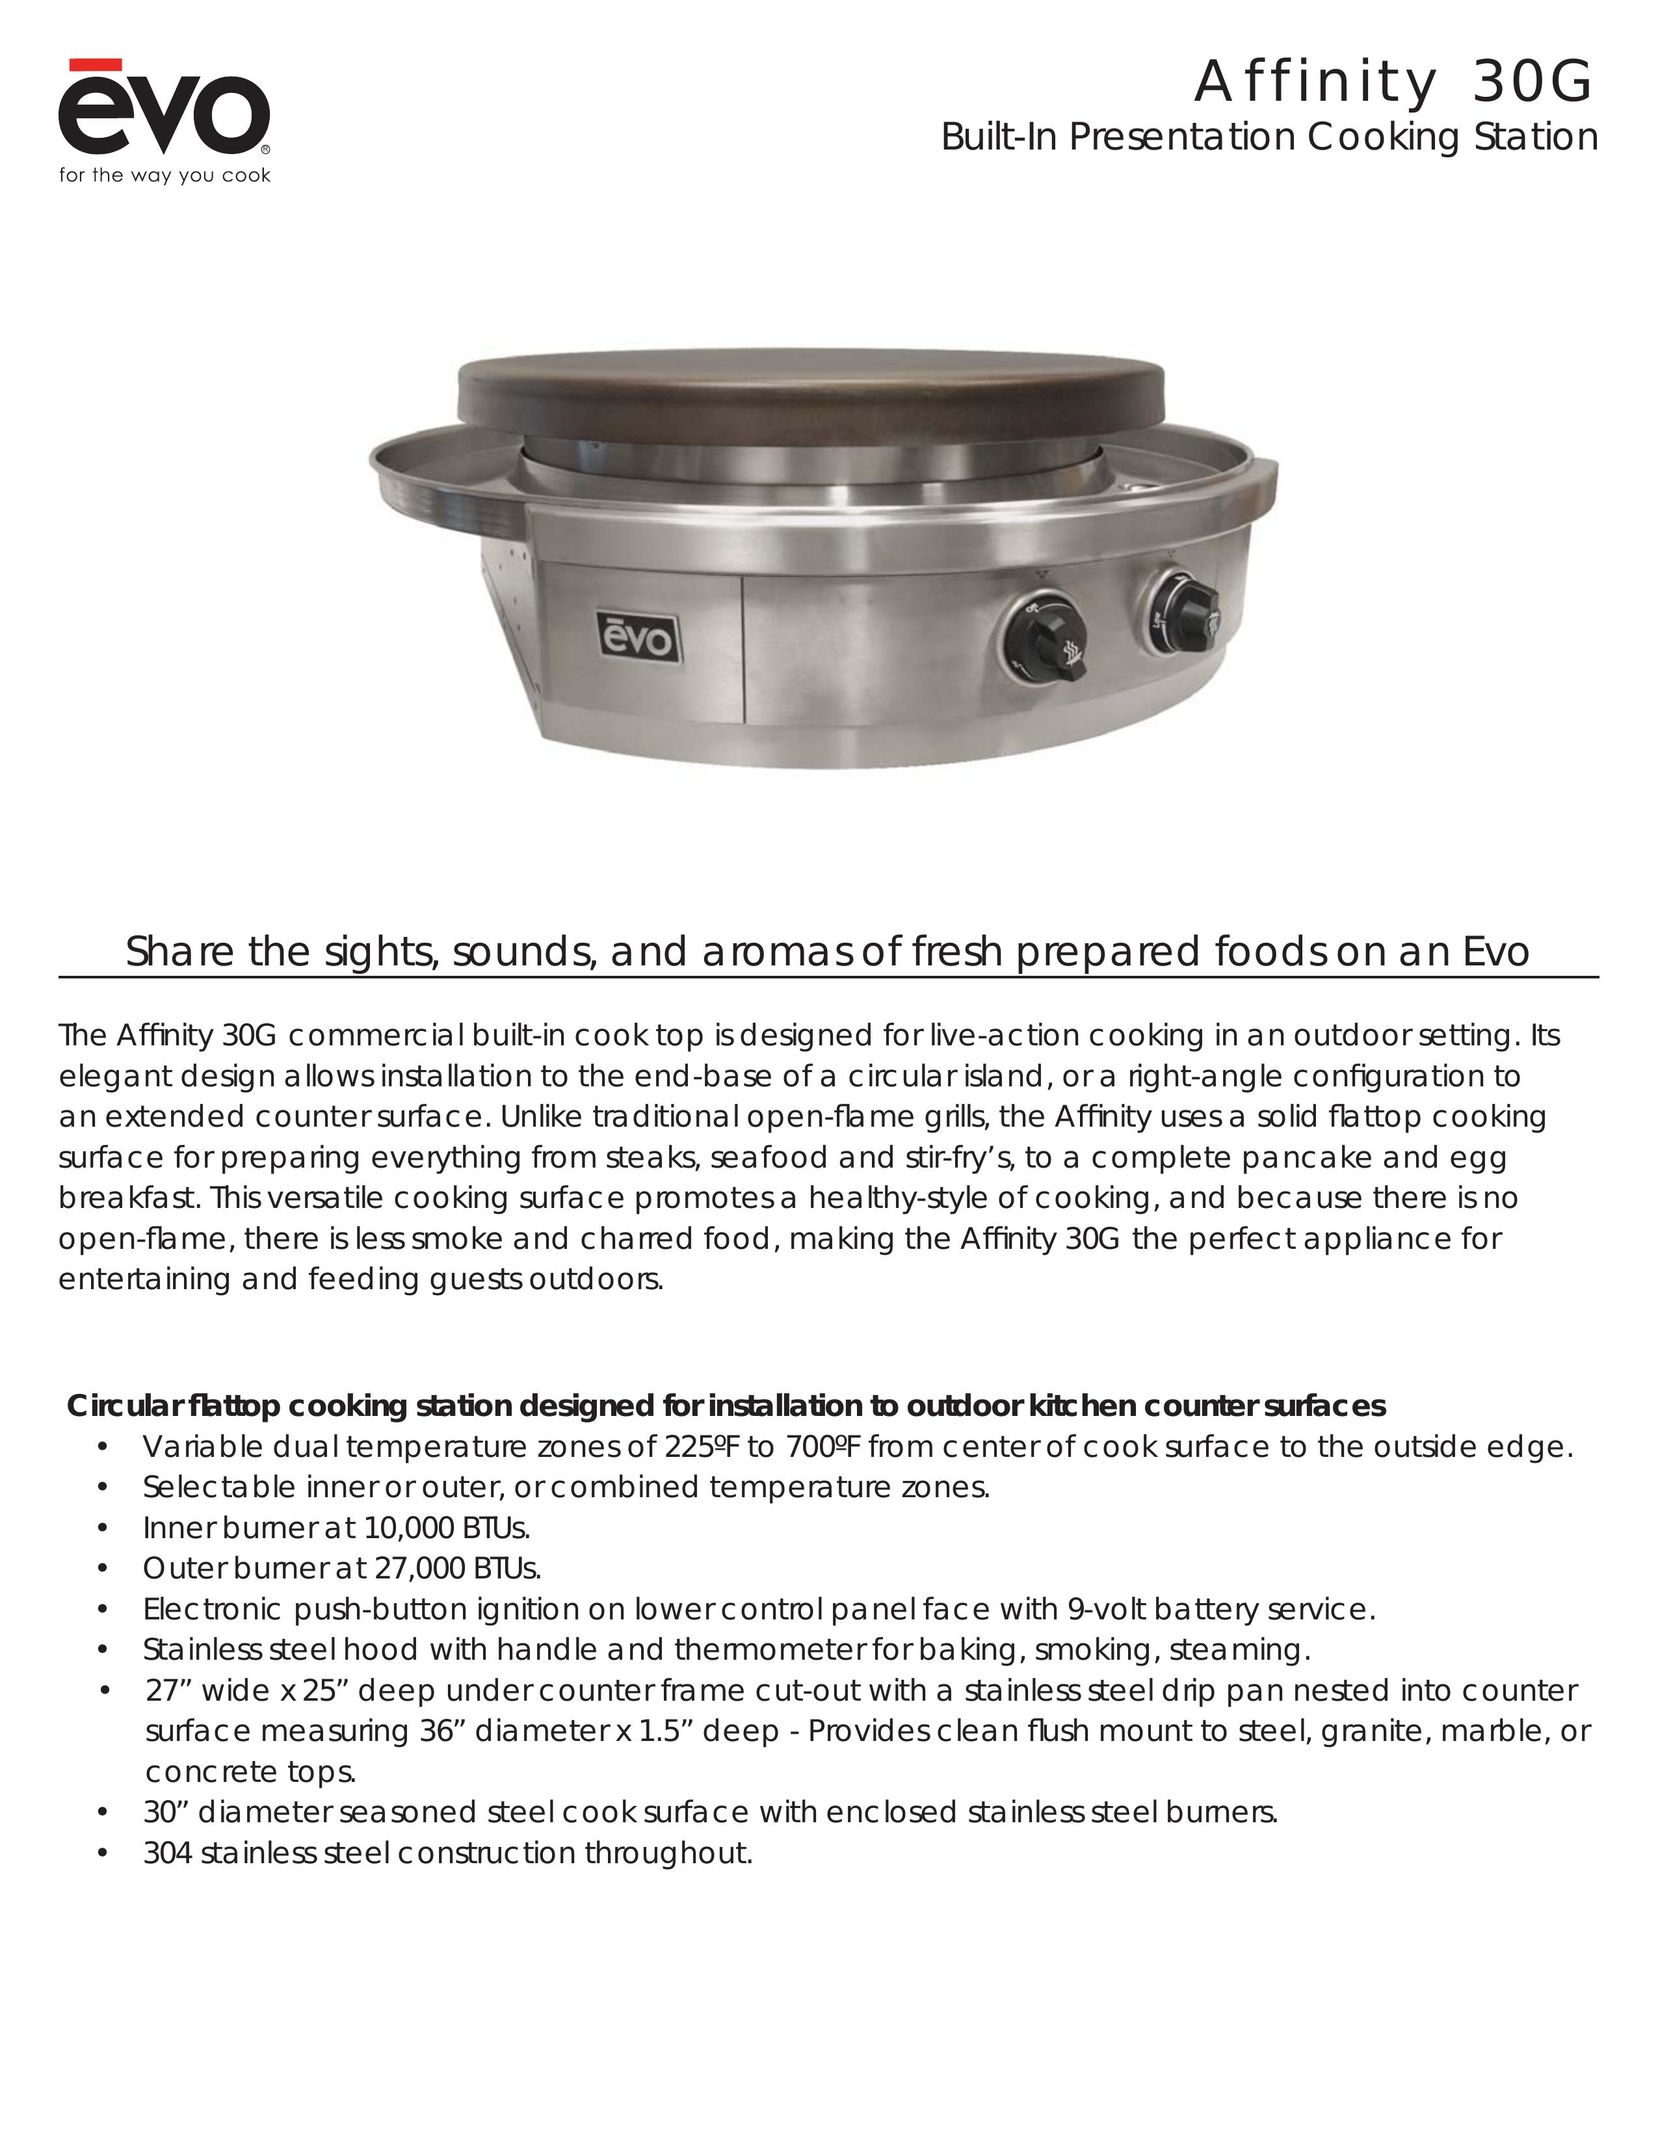 Evo Fitness Affinity 30G Cooktop User Manual